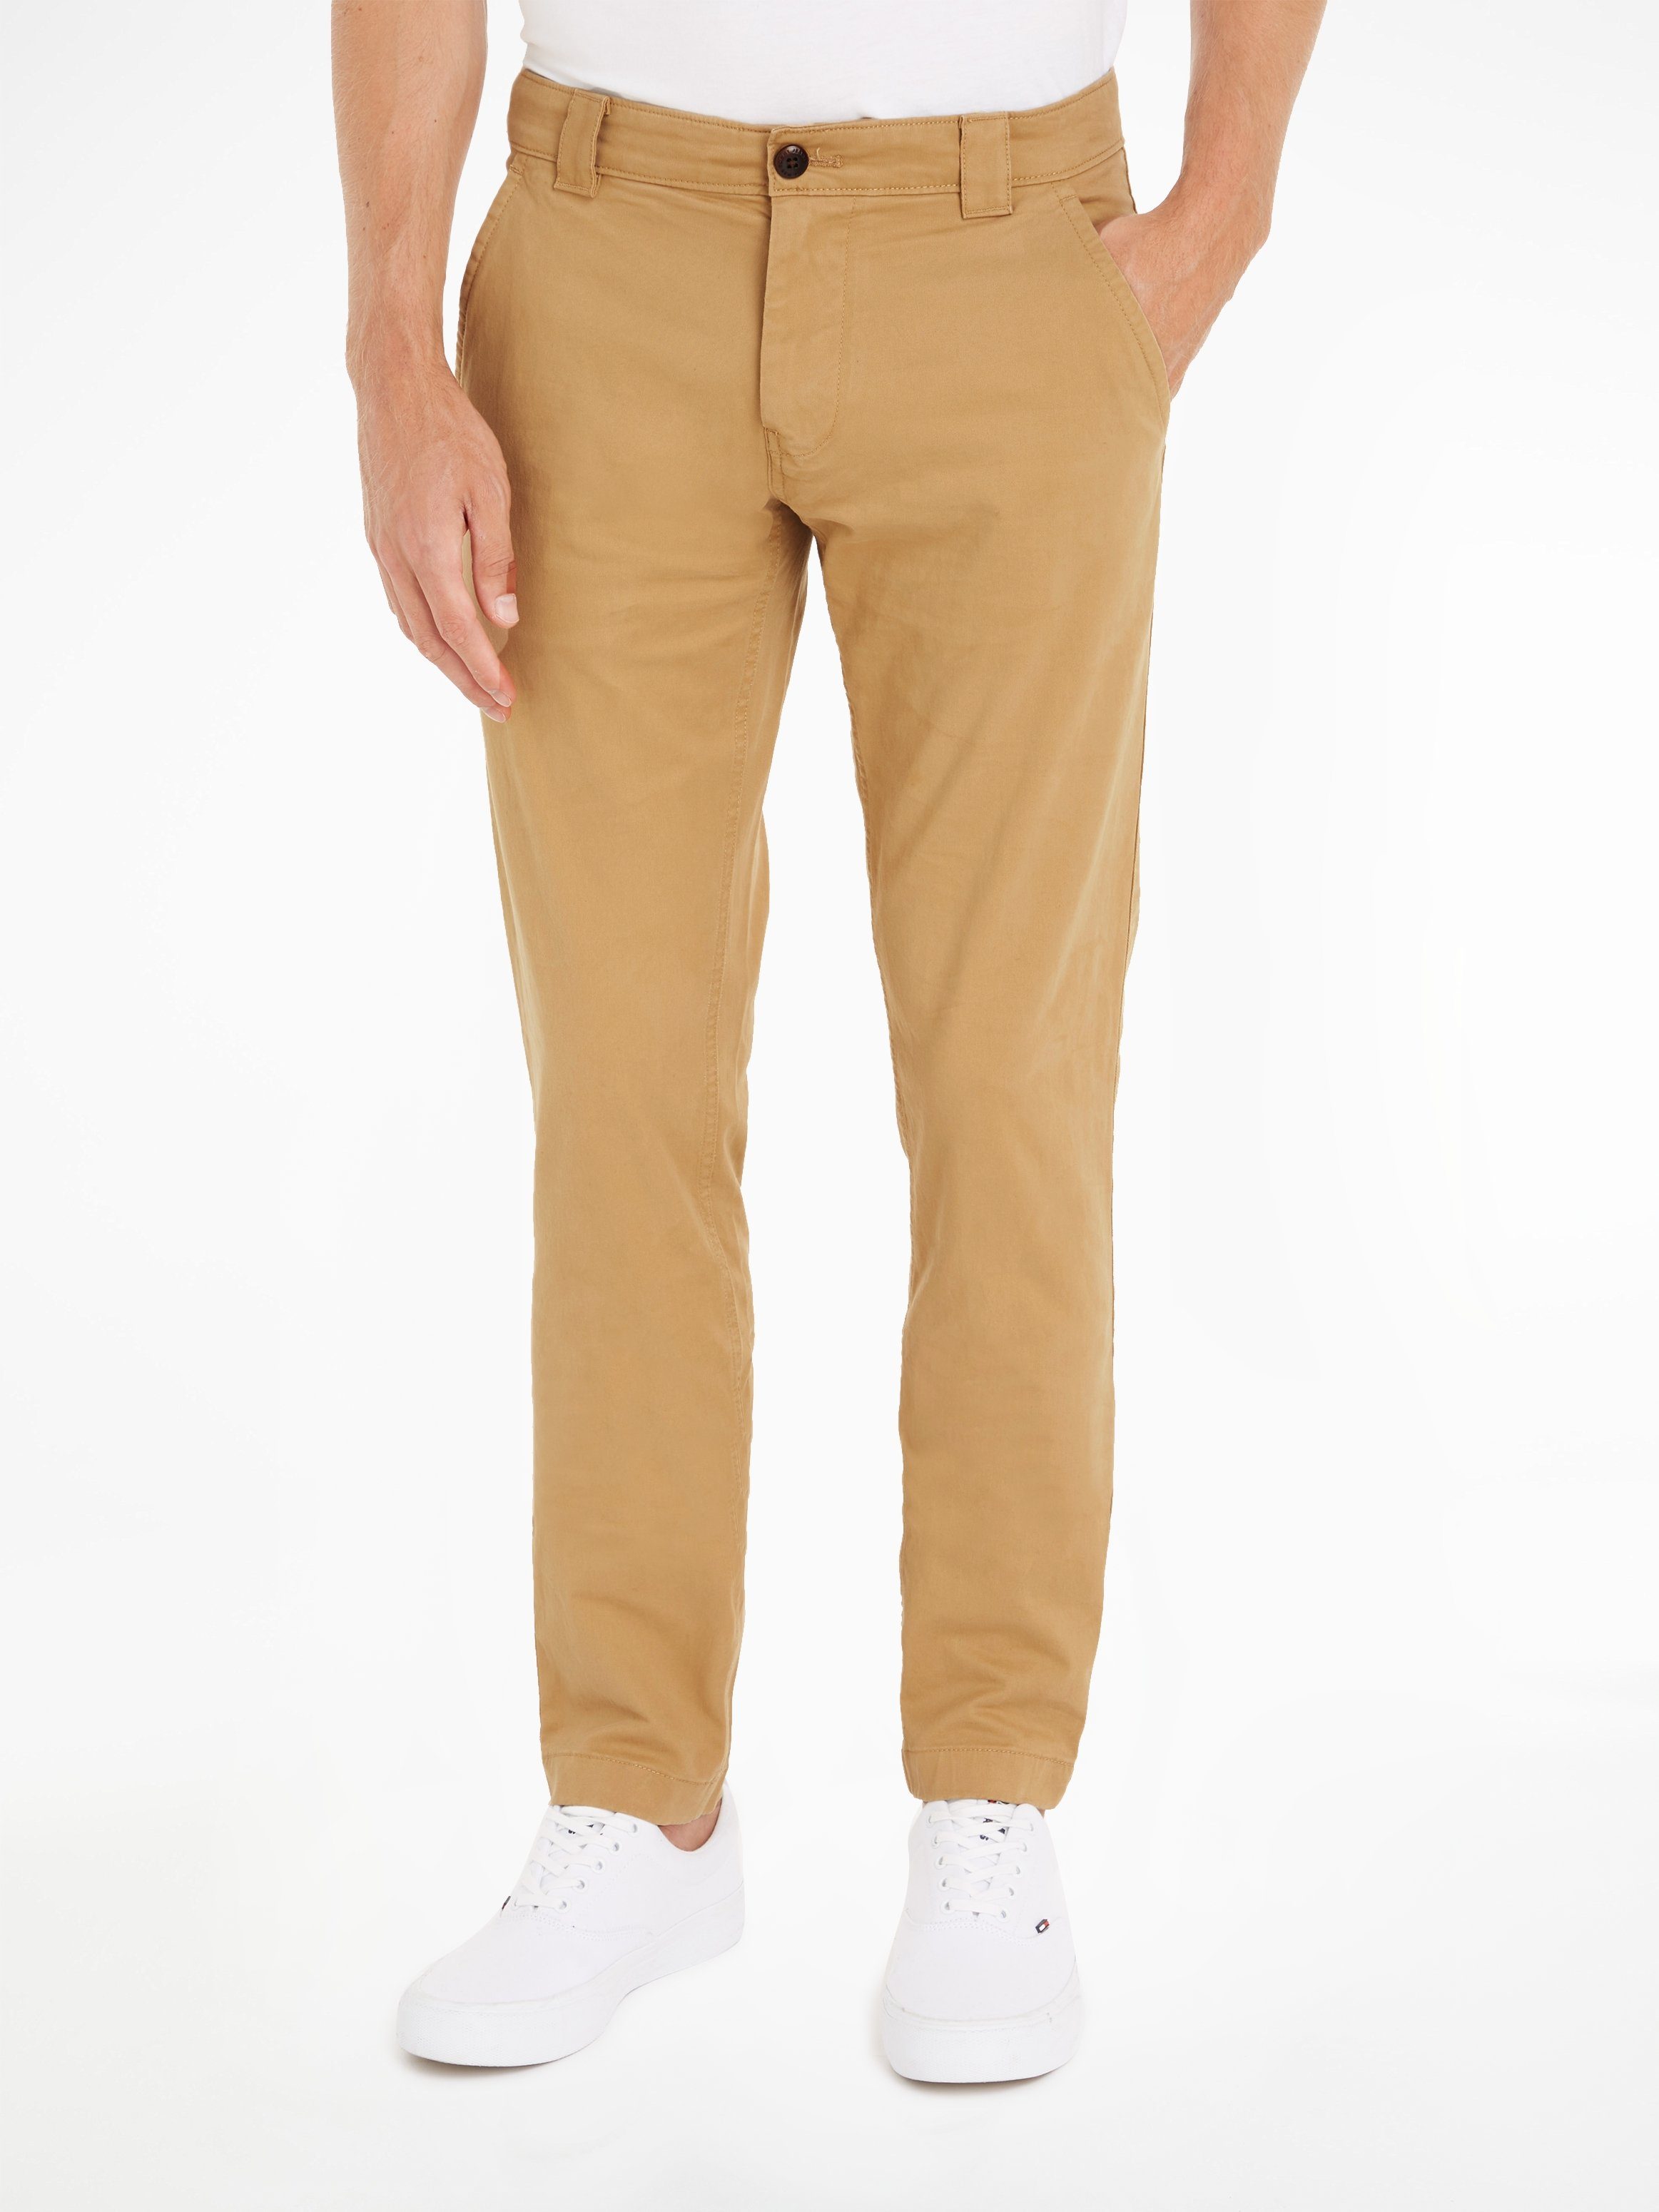 Tommy Jeans Chinohose TJM SCANTON CHINO PANT mit Markenlabel Classic Khaki